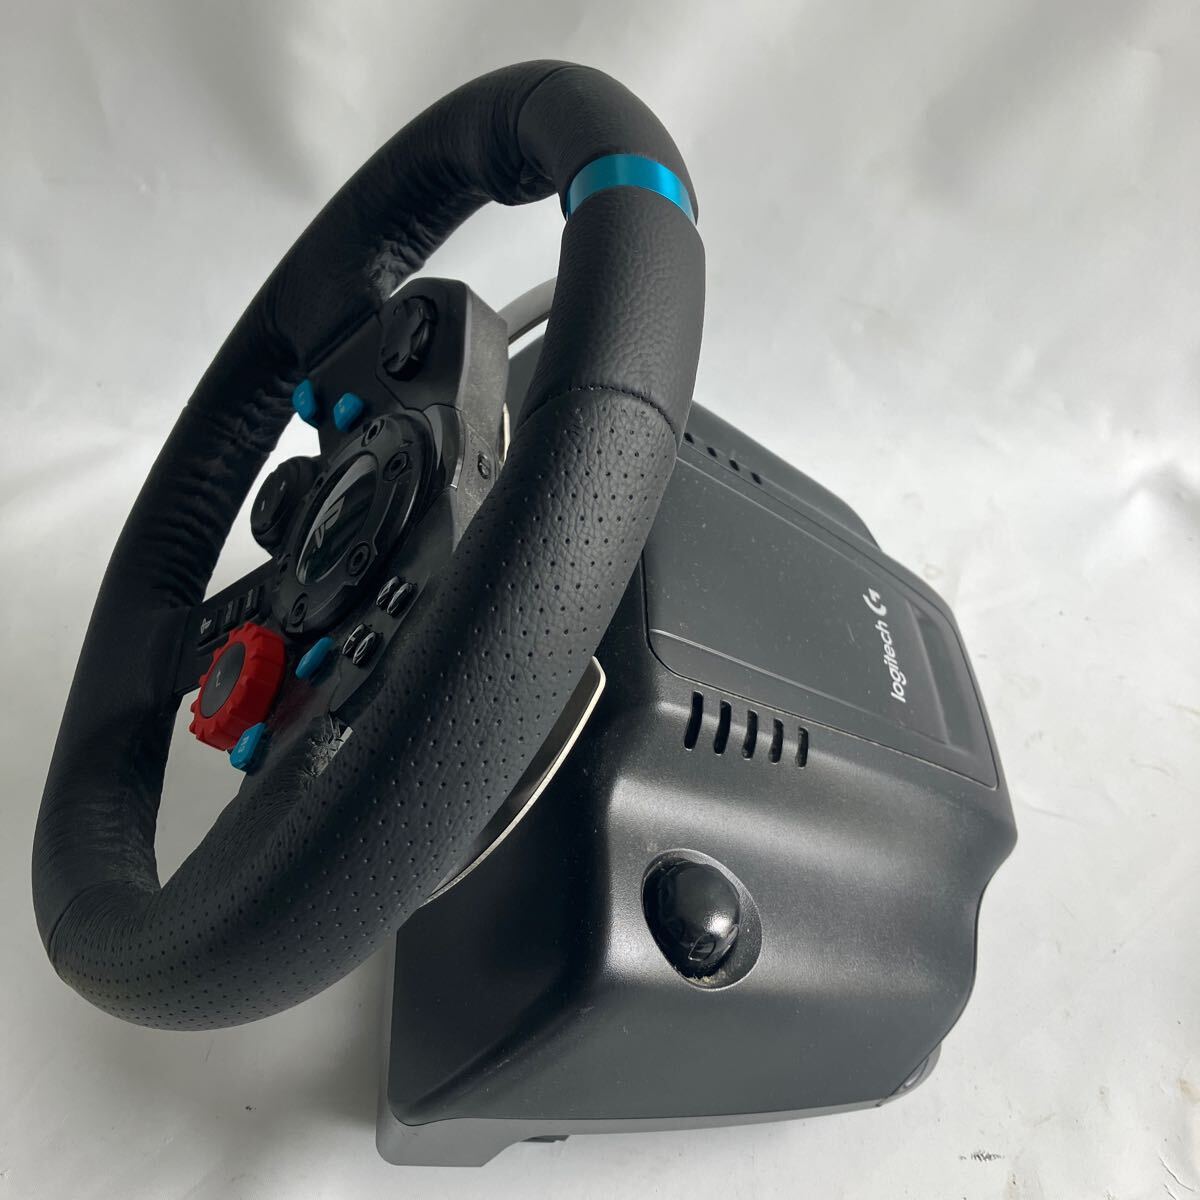 v[500 jpy start ] Logicool Logicool G29 driving force PS4 steering wheel controller racing wheel stand attaching 